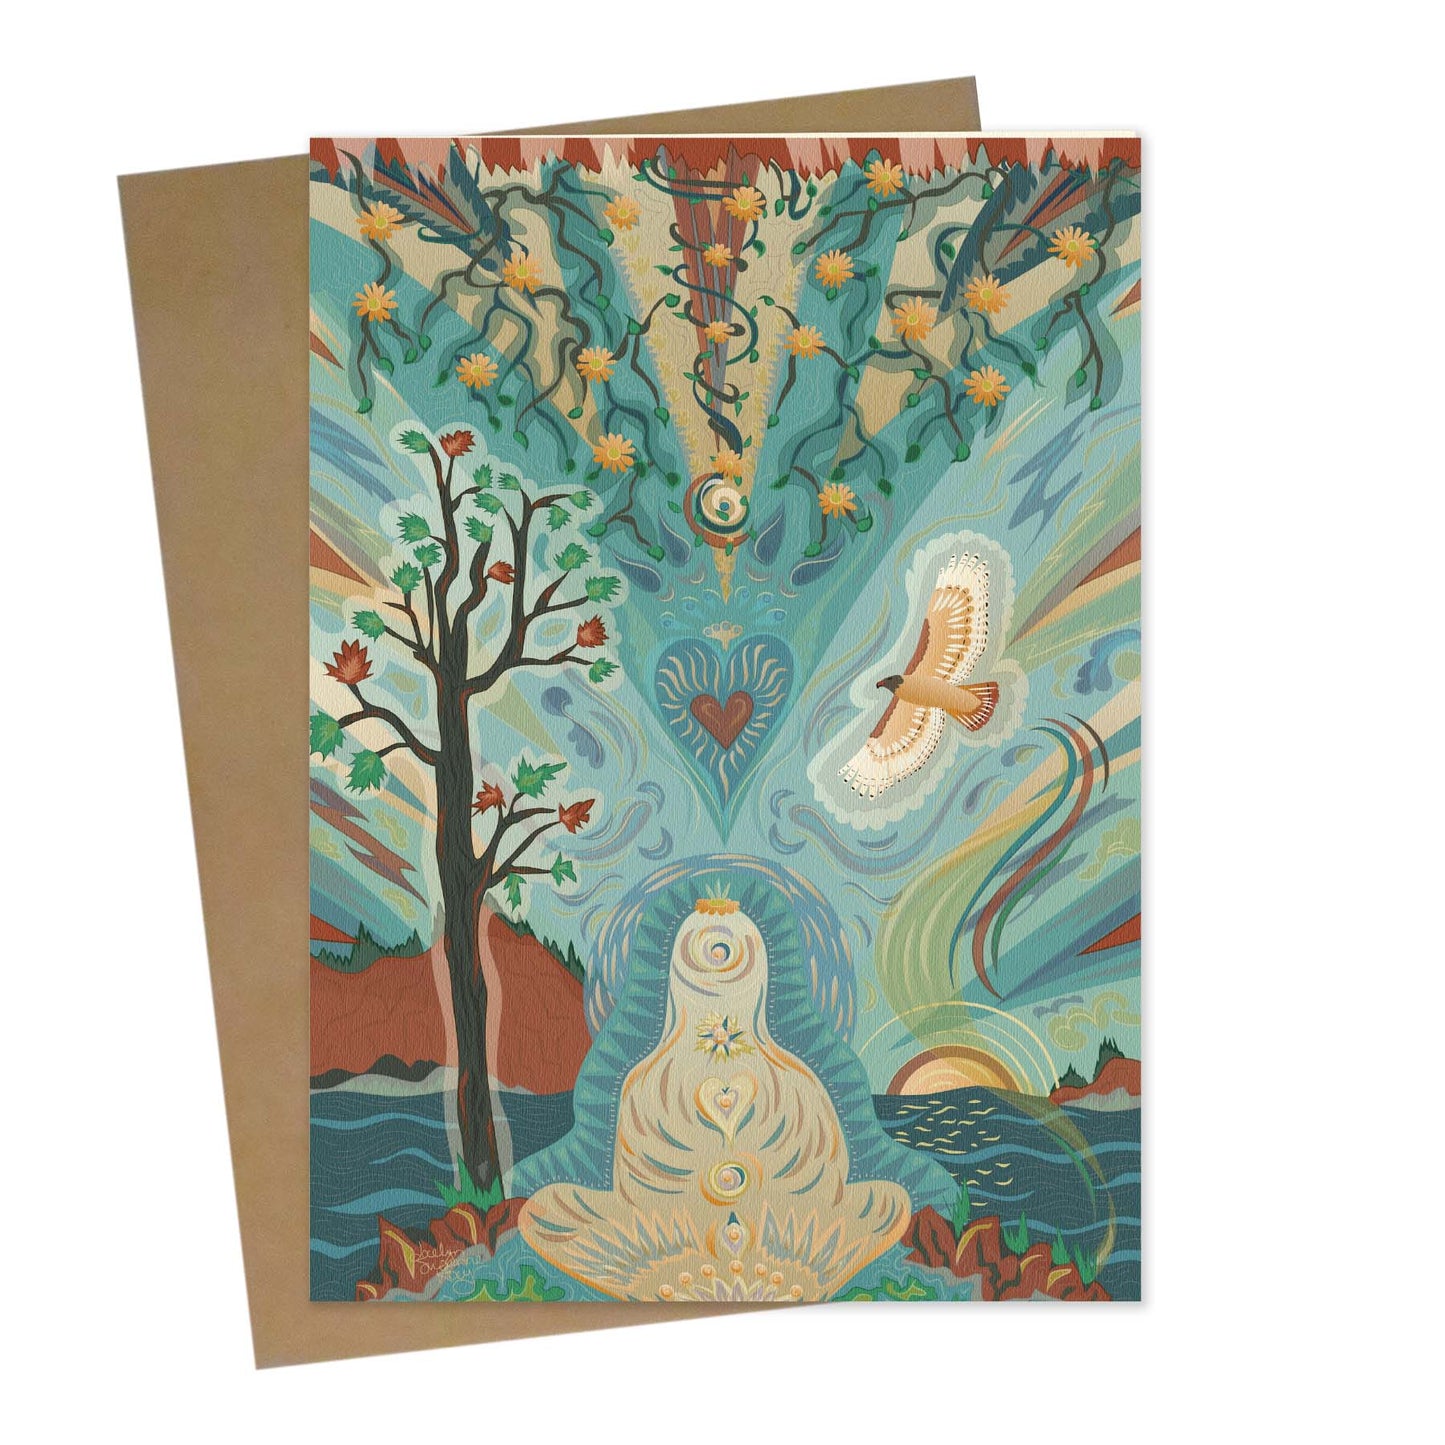 mockup for greeting card with digital design showing an imaginary illustration of a person in buddha pose beneath a tree and a flowery design in the sky